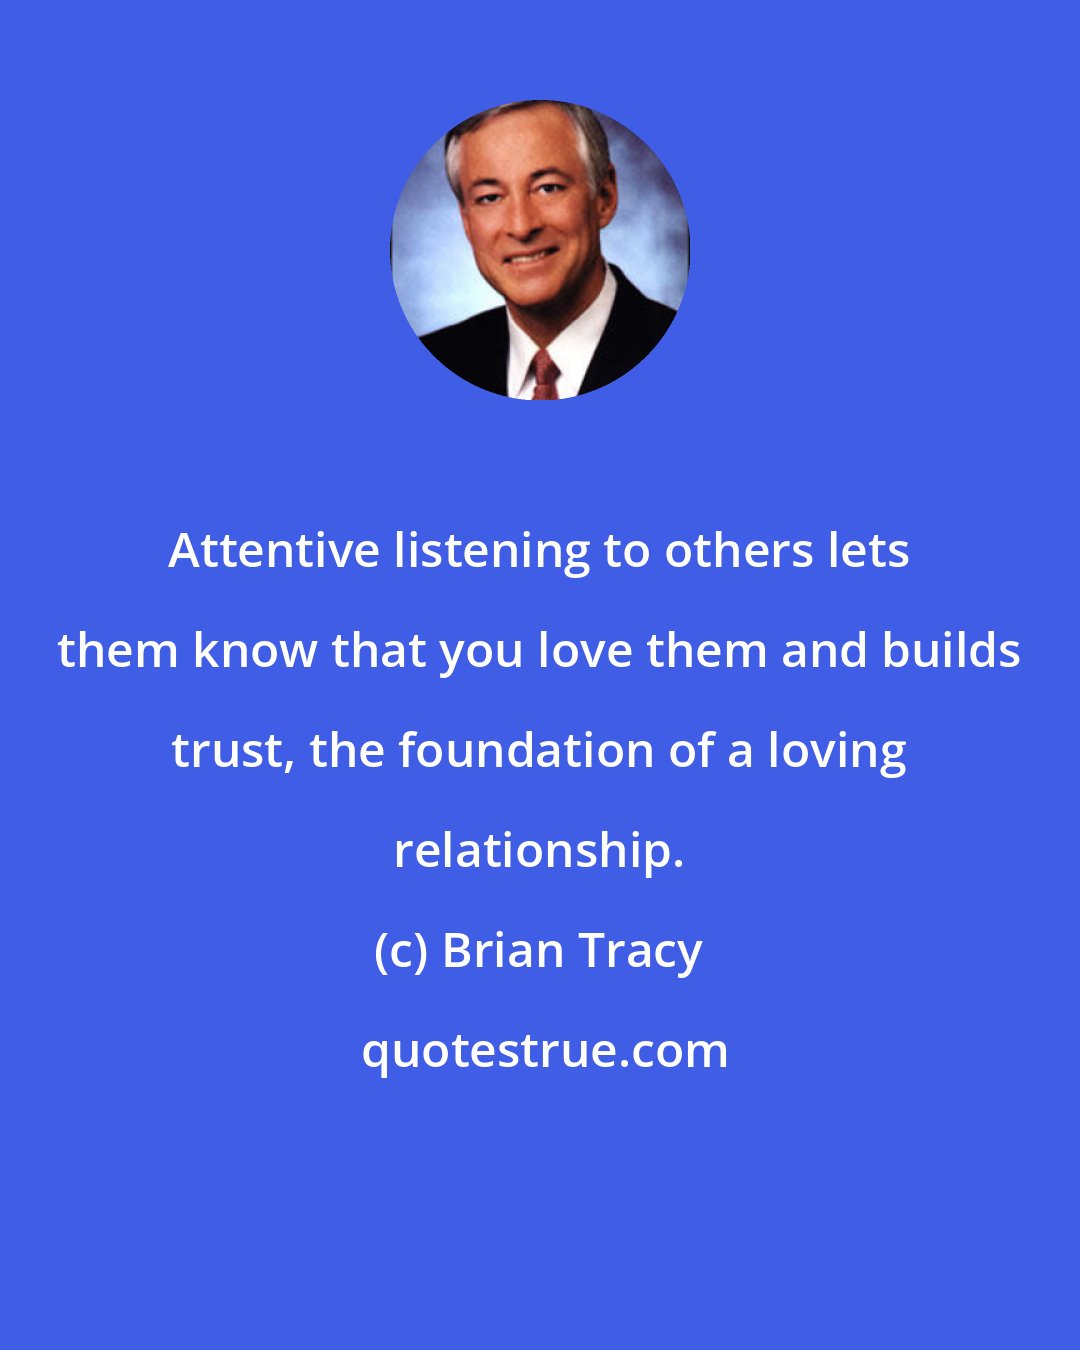 Brian Tracy: Attentive listening to others lets them know that you love them and builds trust, the foundation of a loving relationship.